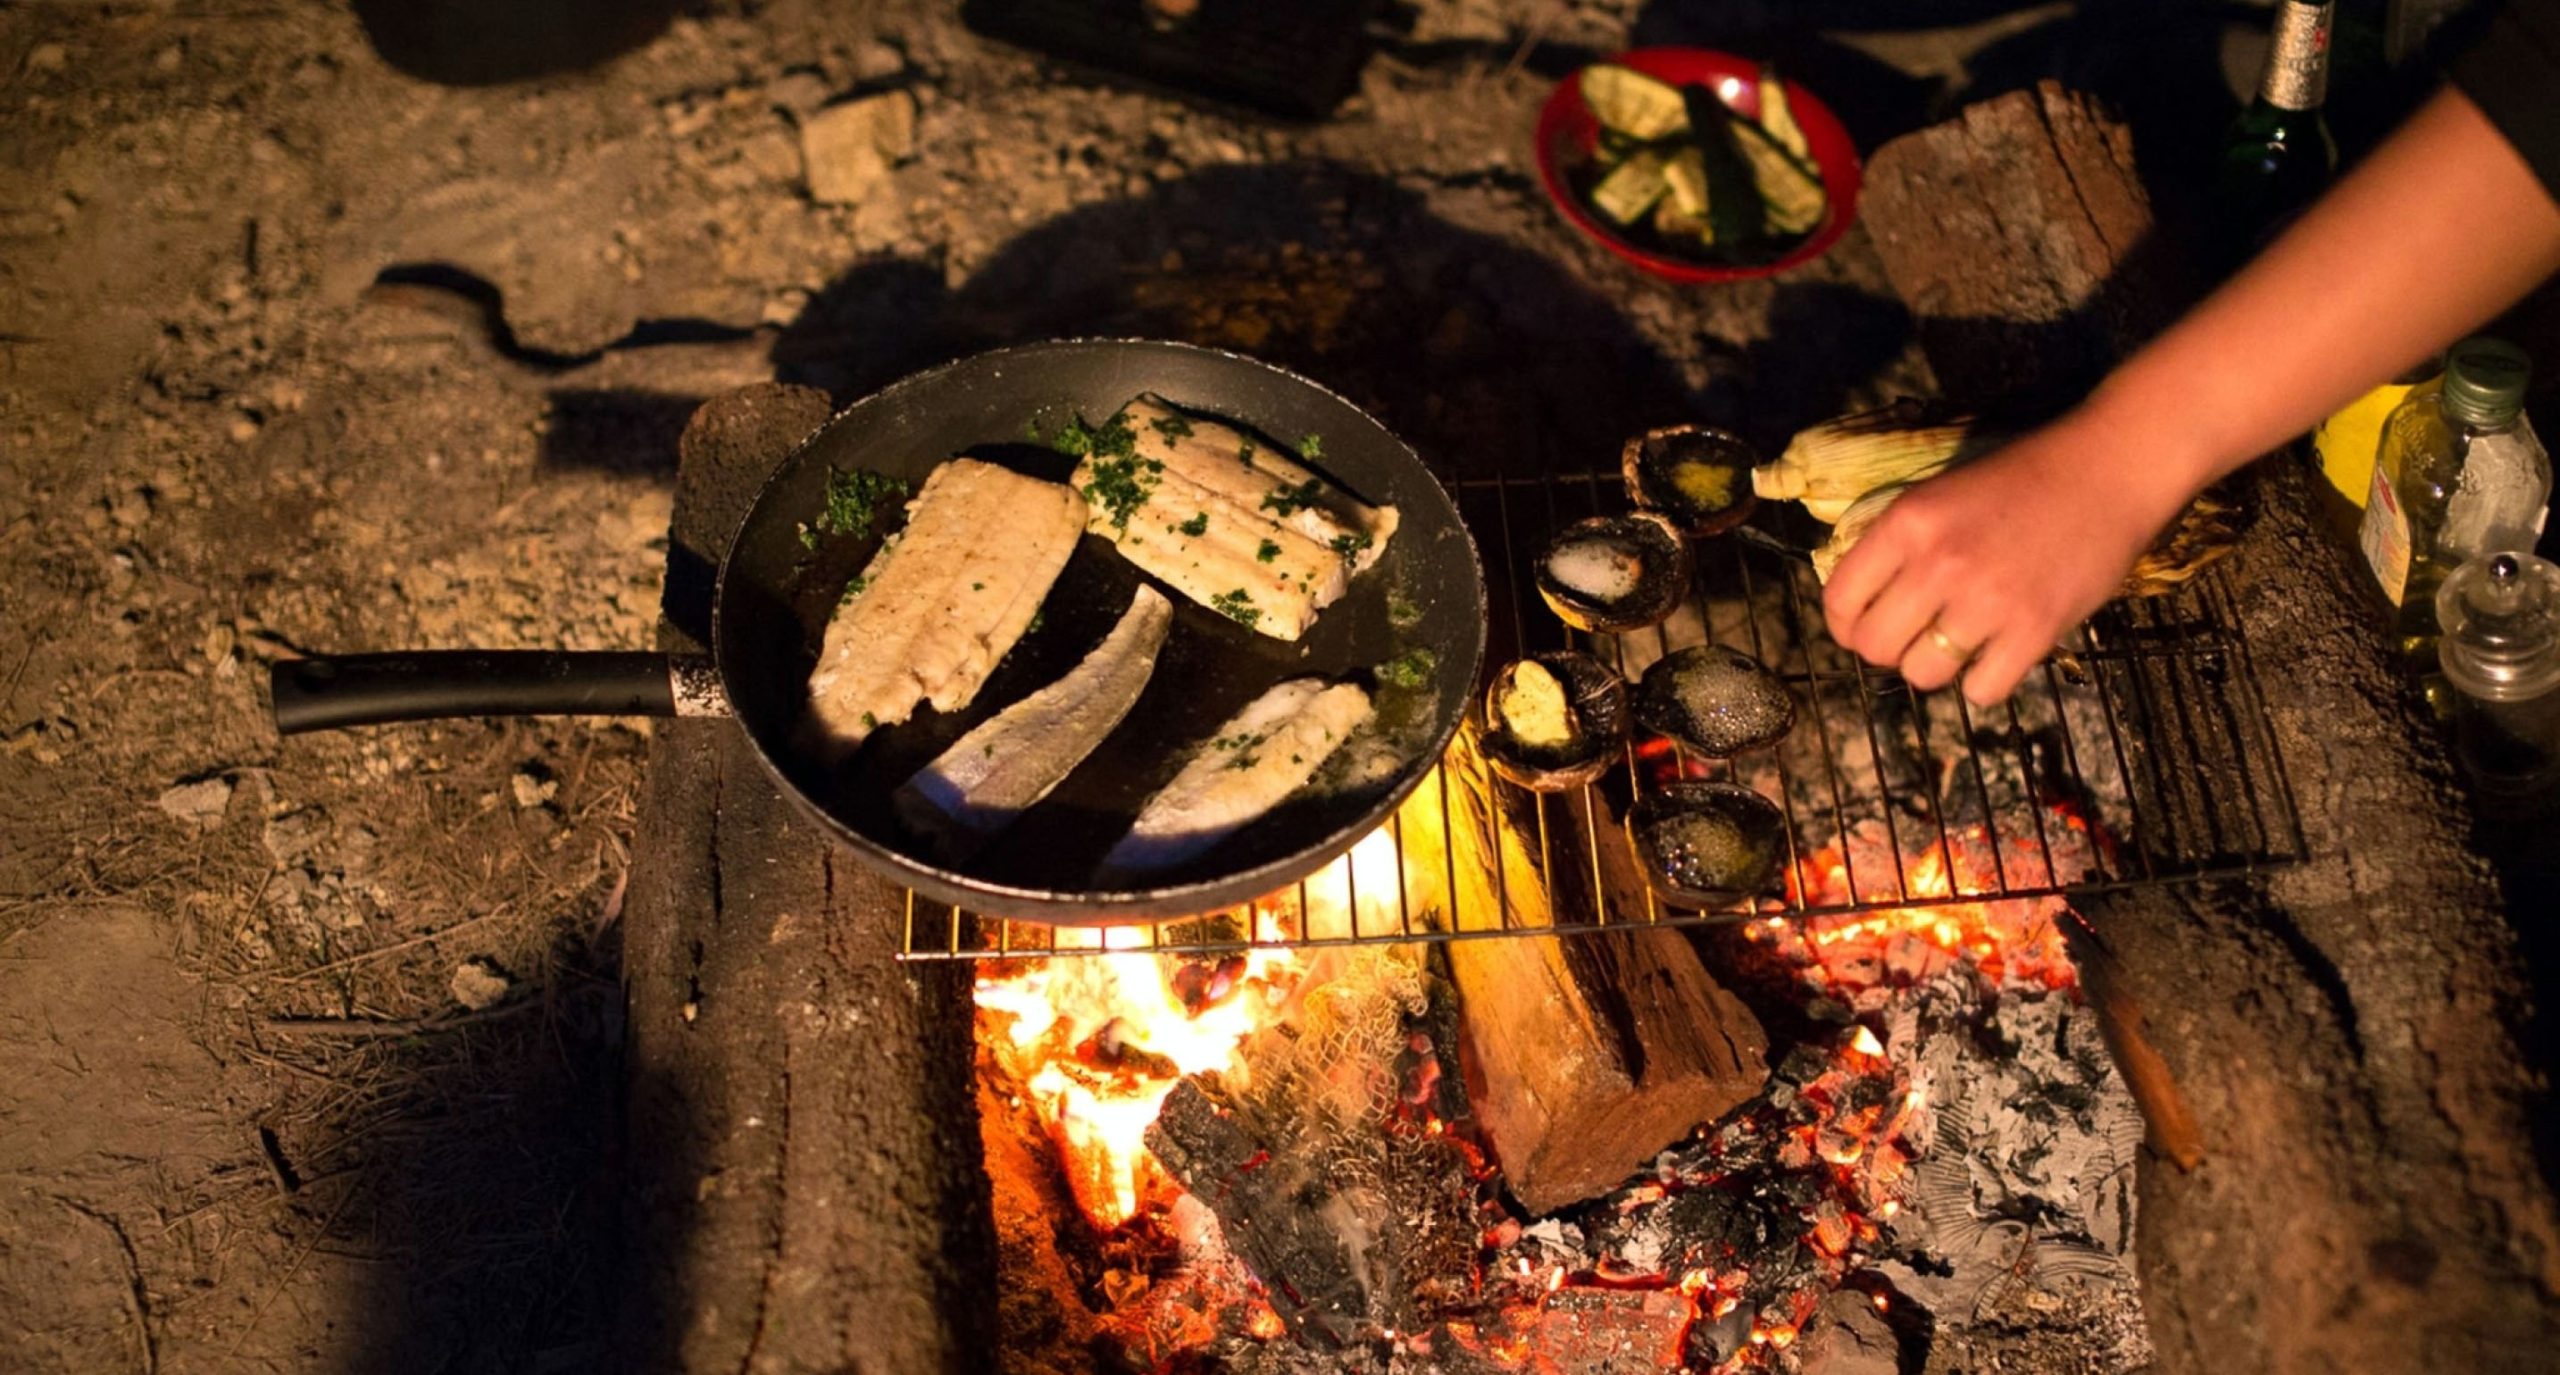 Cooking over campfire